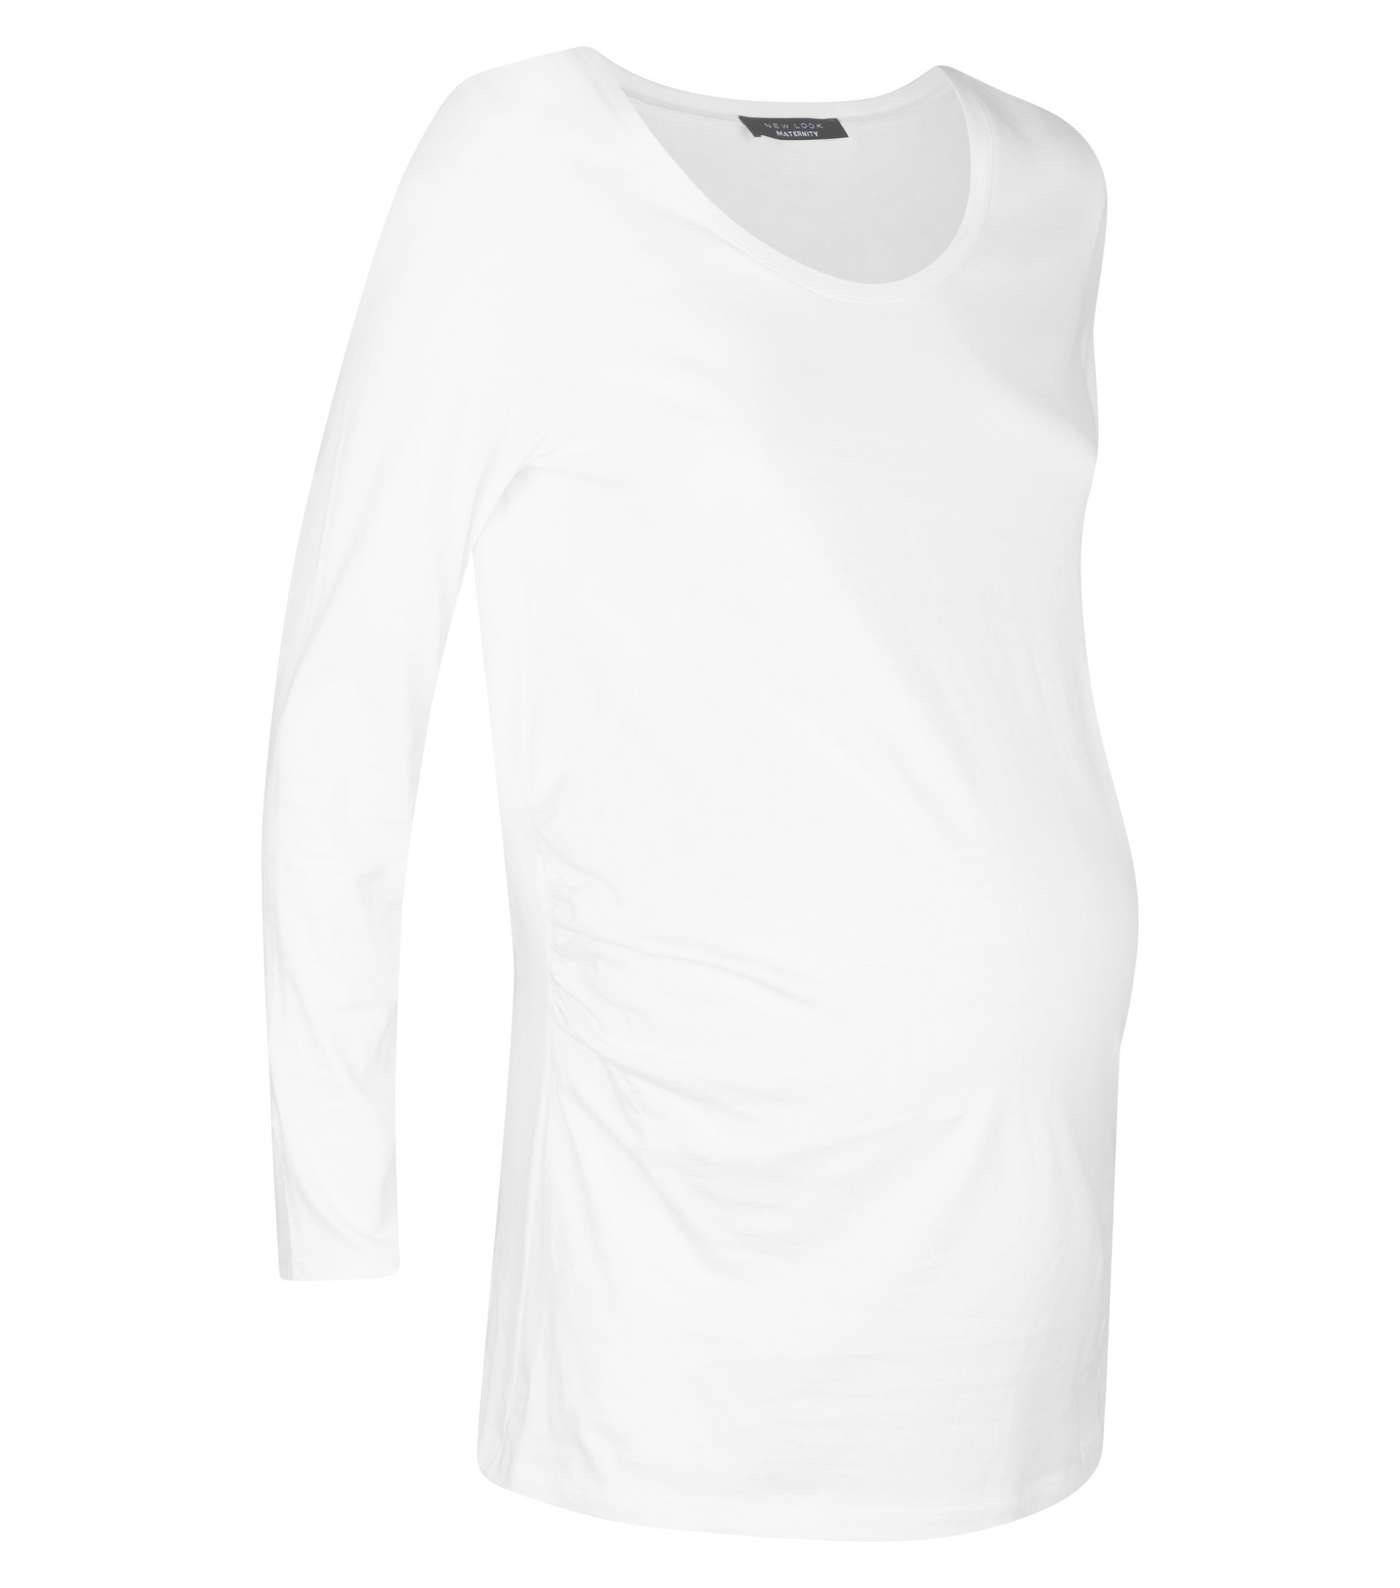 Maternity White Long Sleeve Top Image 4